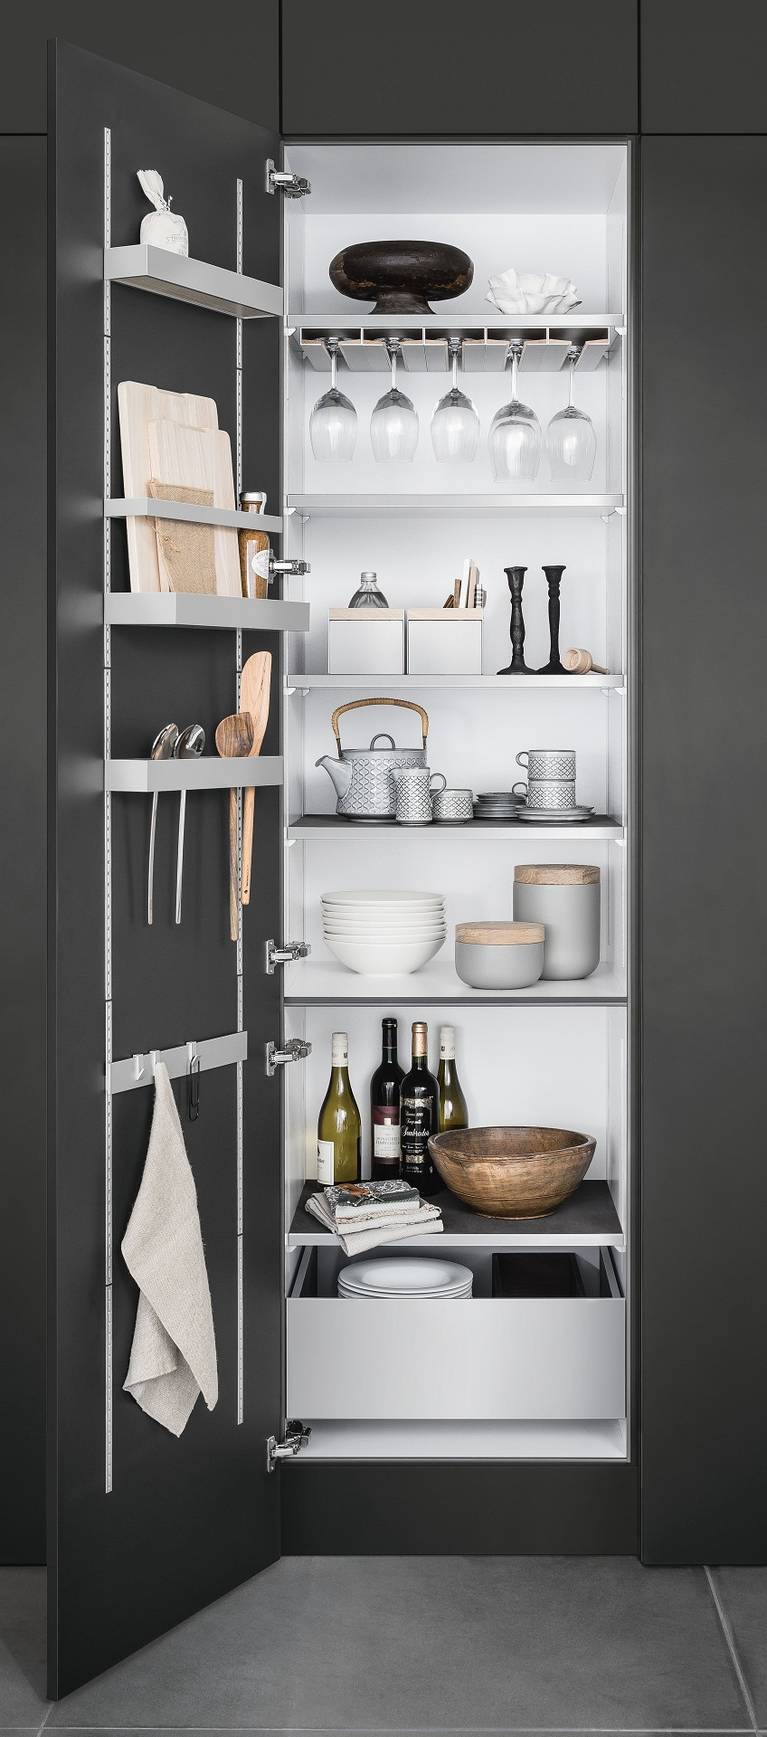 SieMatic MultiMatic interior organization system for grey cabinets creates more storage space in the kitchen